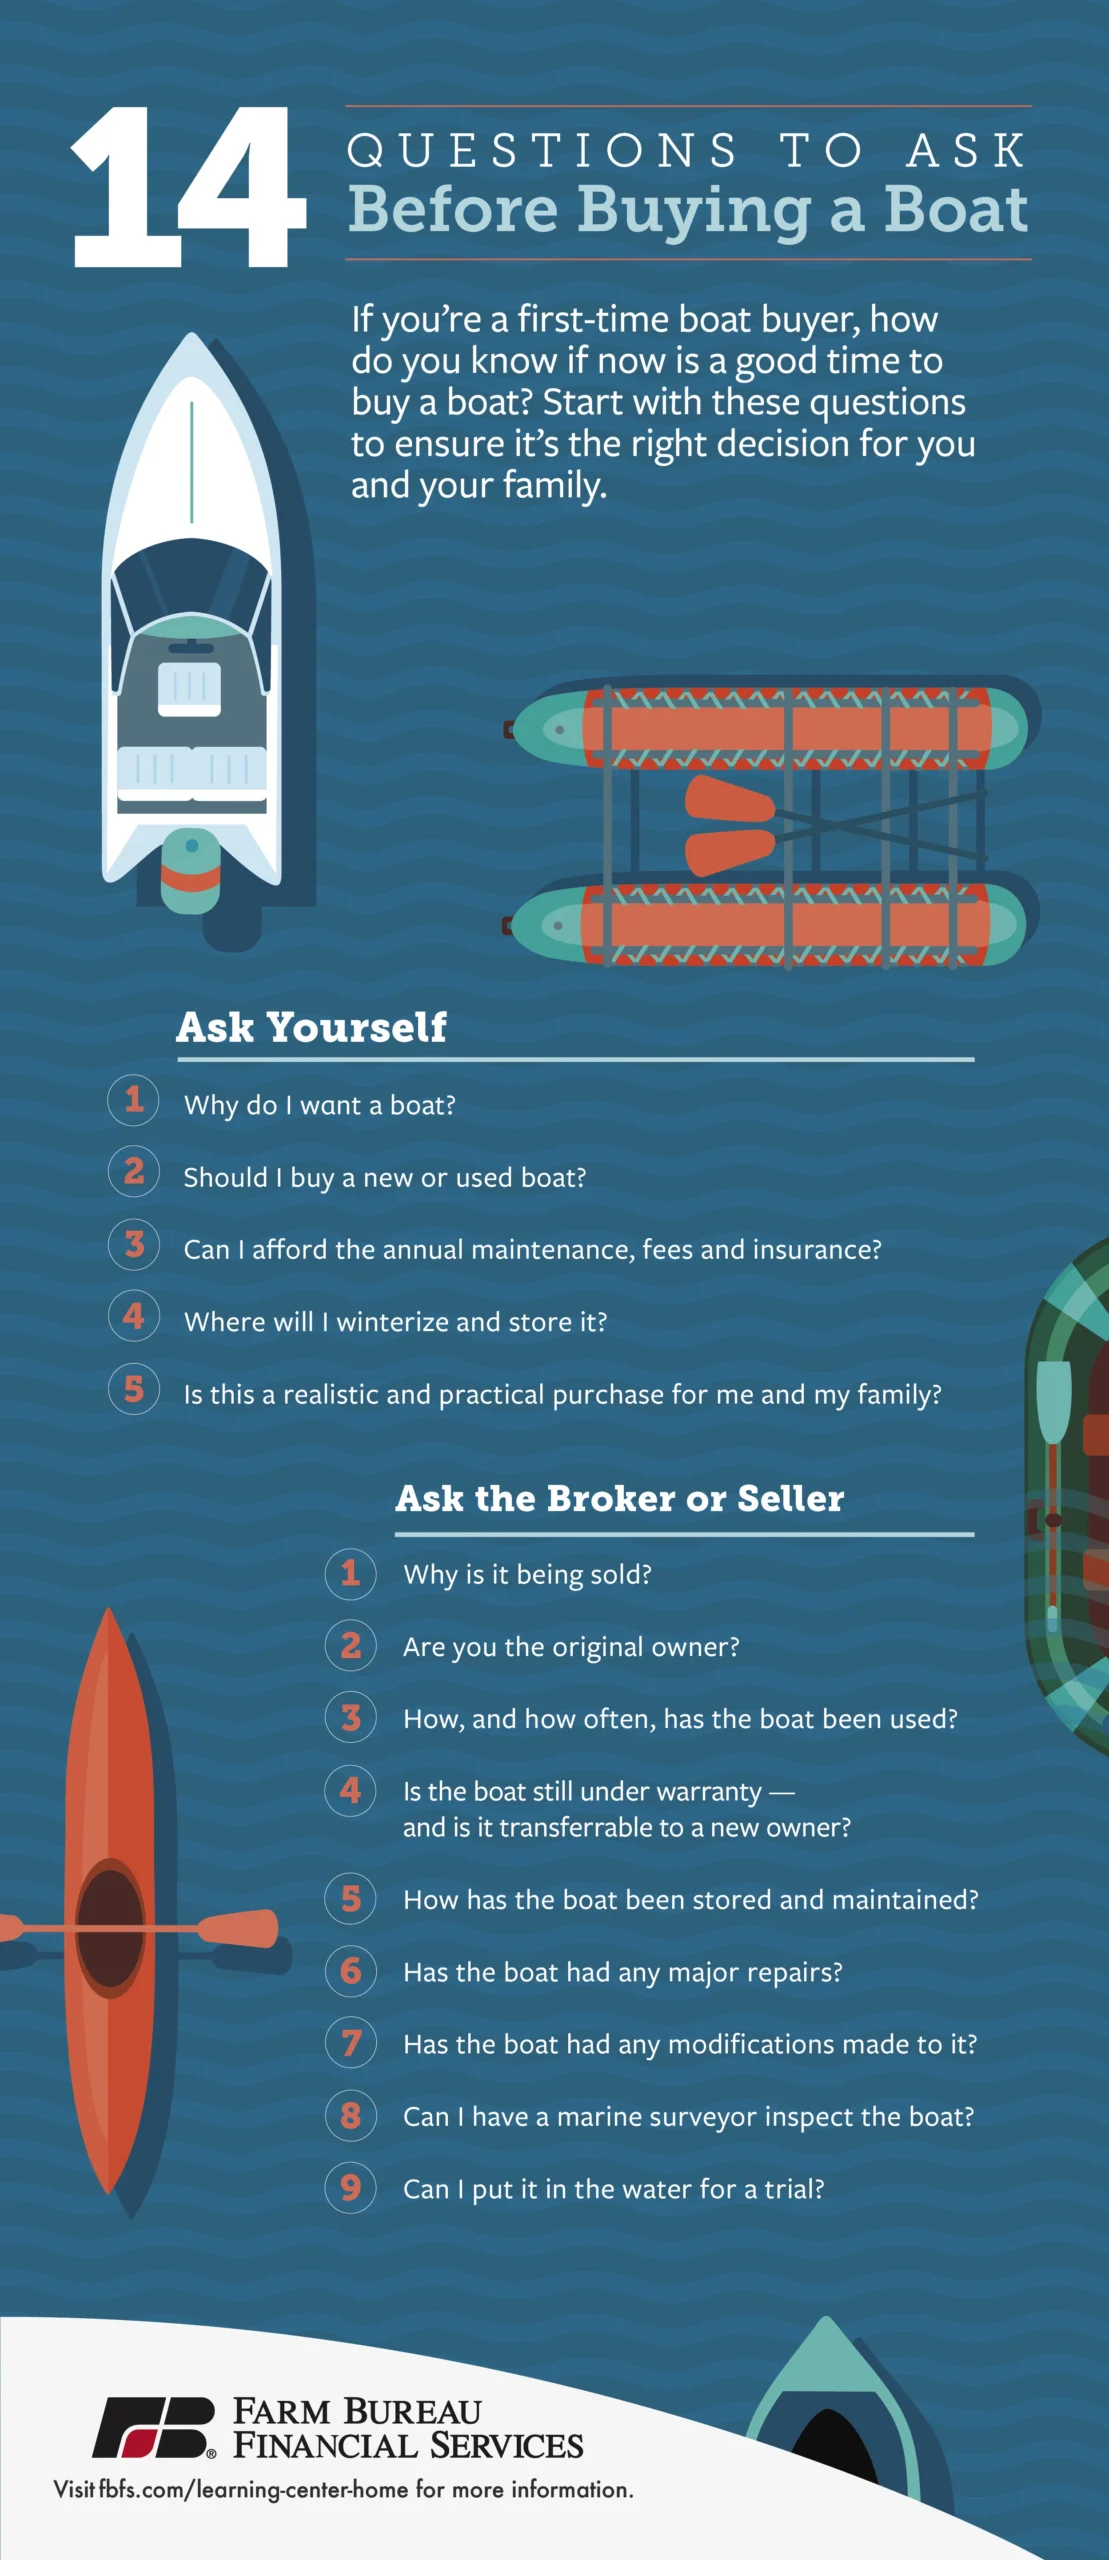 What to Look for When Buying a Boat